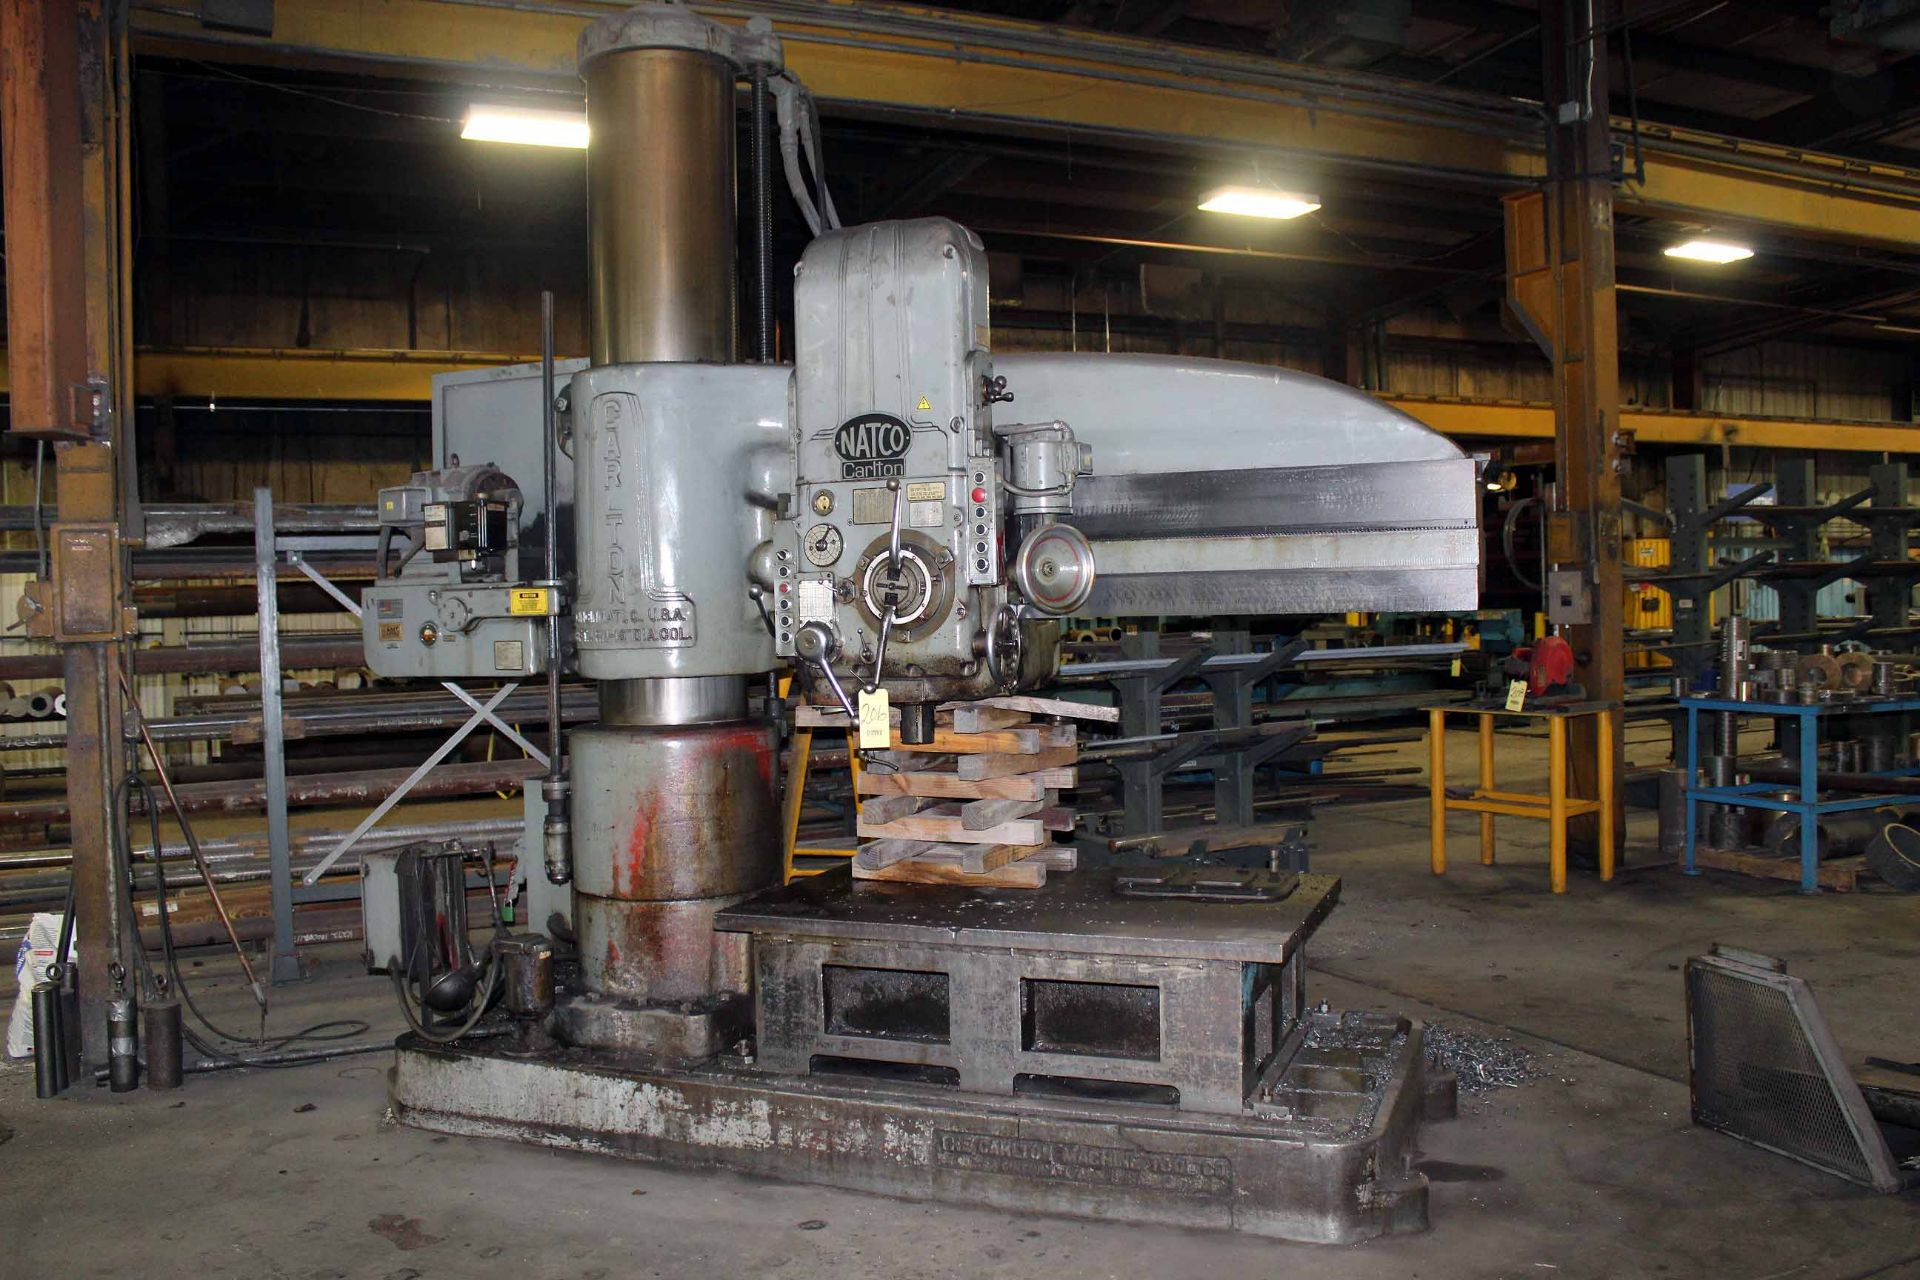 RADIAL ARM DRILL, NATCO CARLTON 6’ X 19”, H.D. steel table, S/N 1006 (Note: out of service)